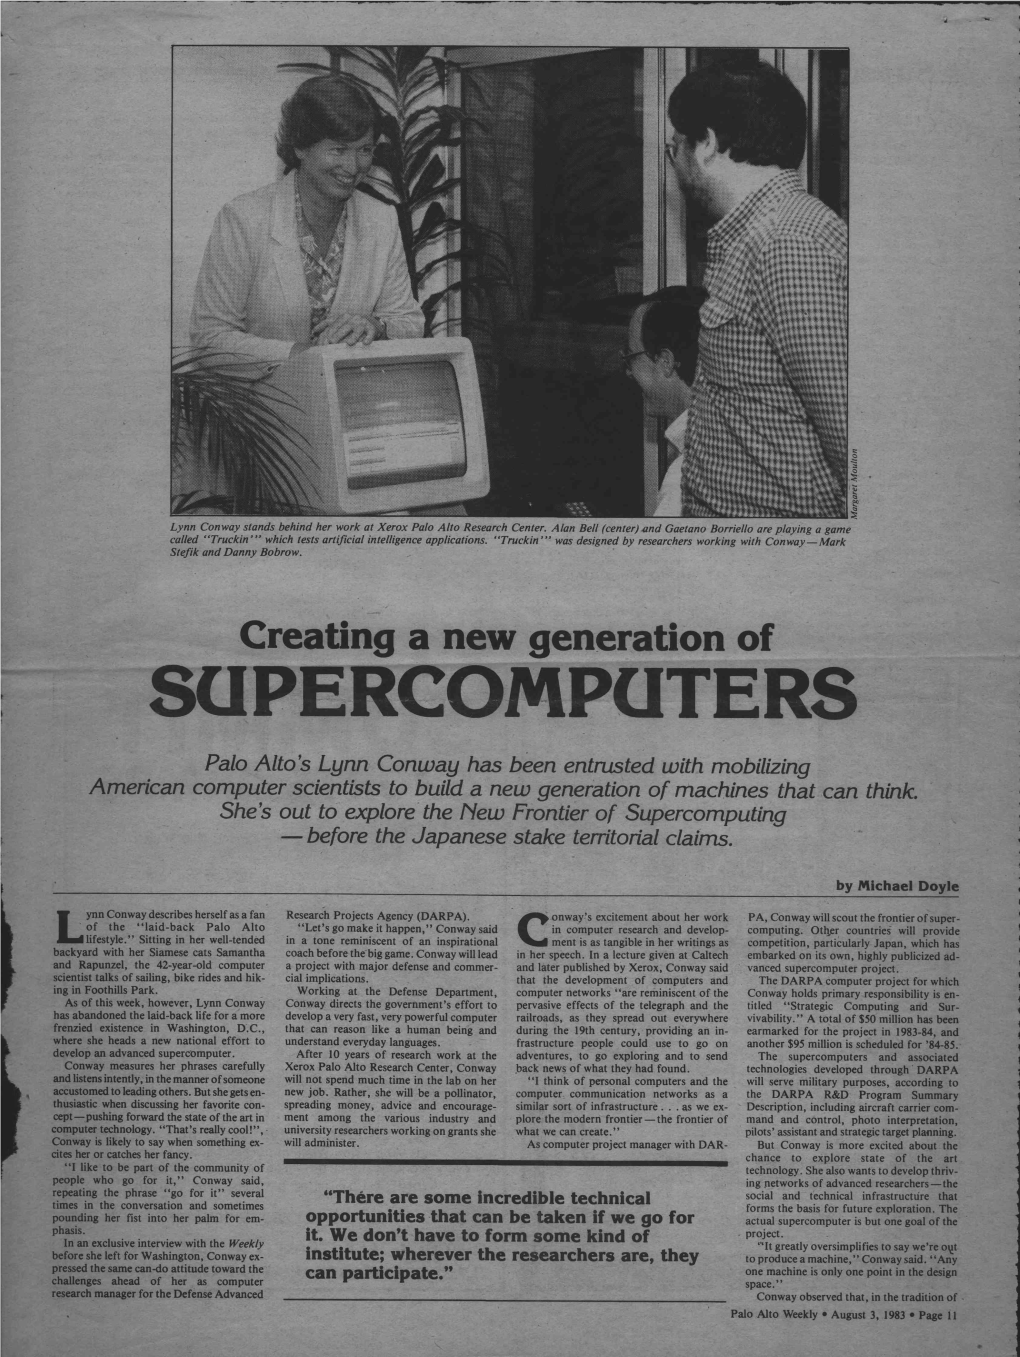 SUPERCOMPUTERS Palo Alto's Lynn Conway Has Been Entrusted with Mobilizing American Computer Scientists to Build a New Generation of Machines That Can Think